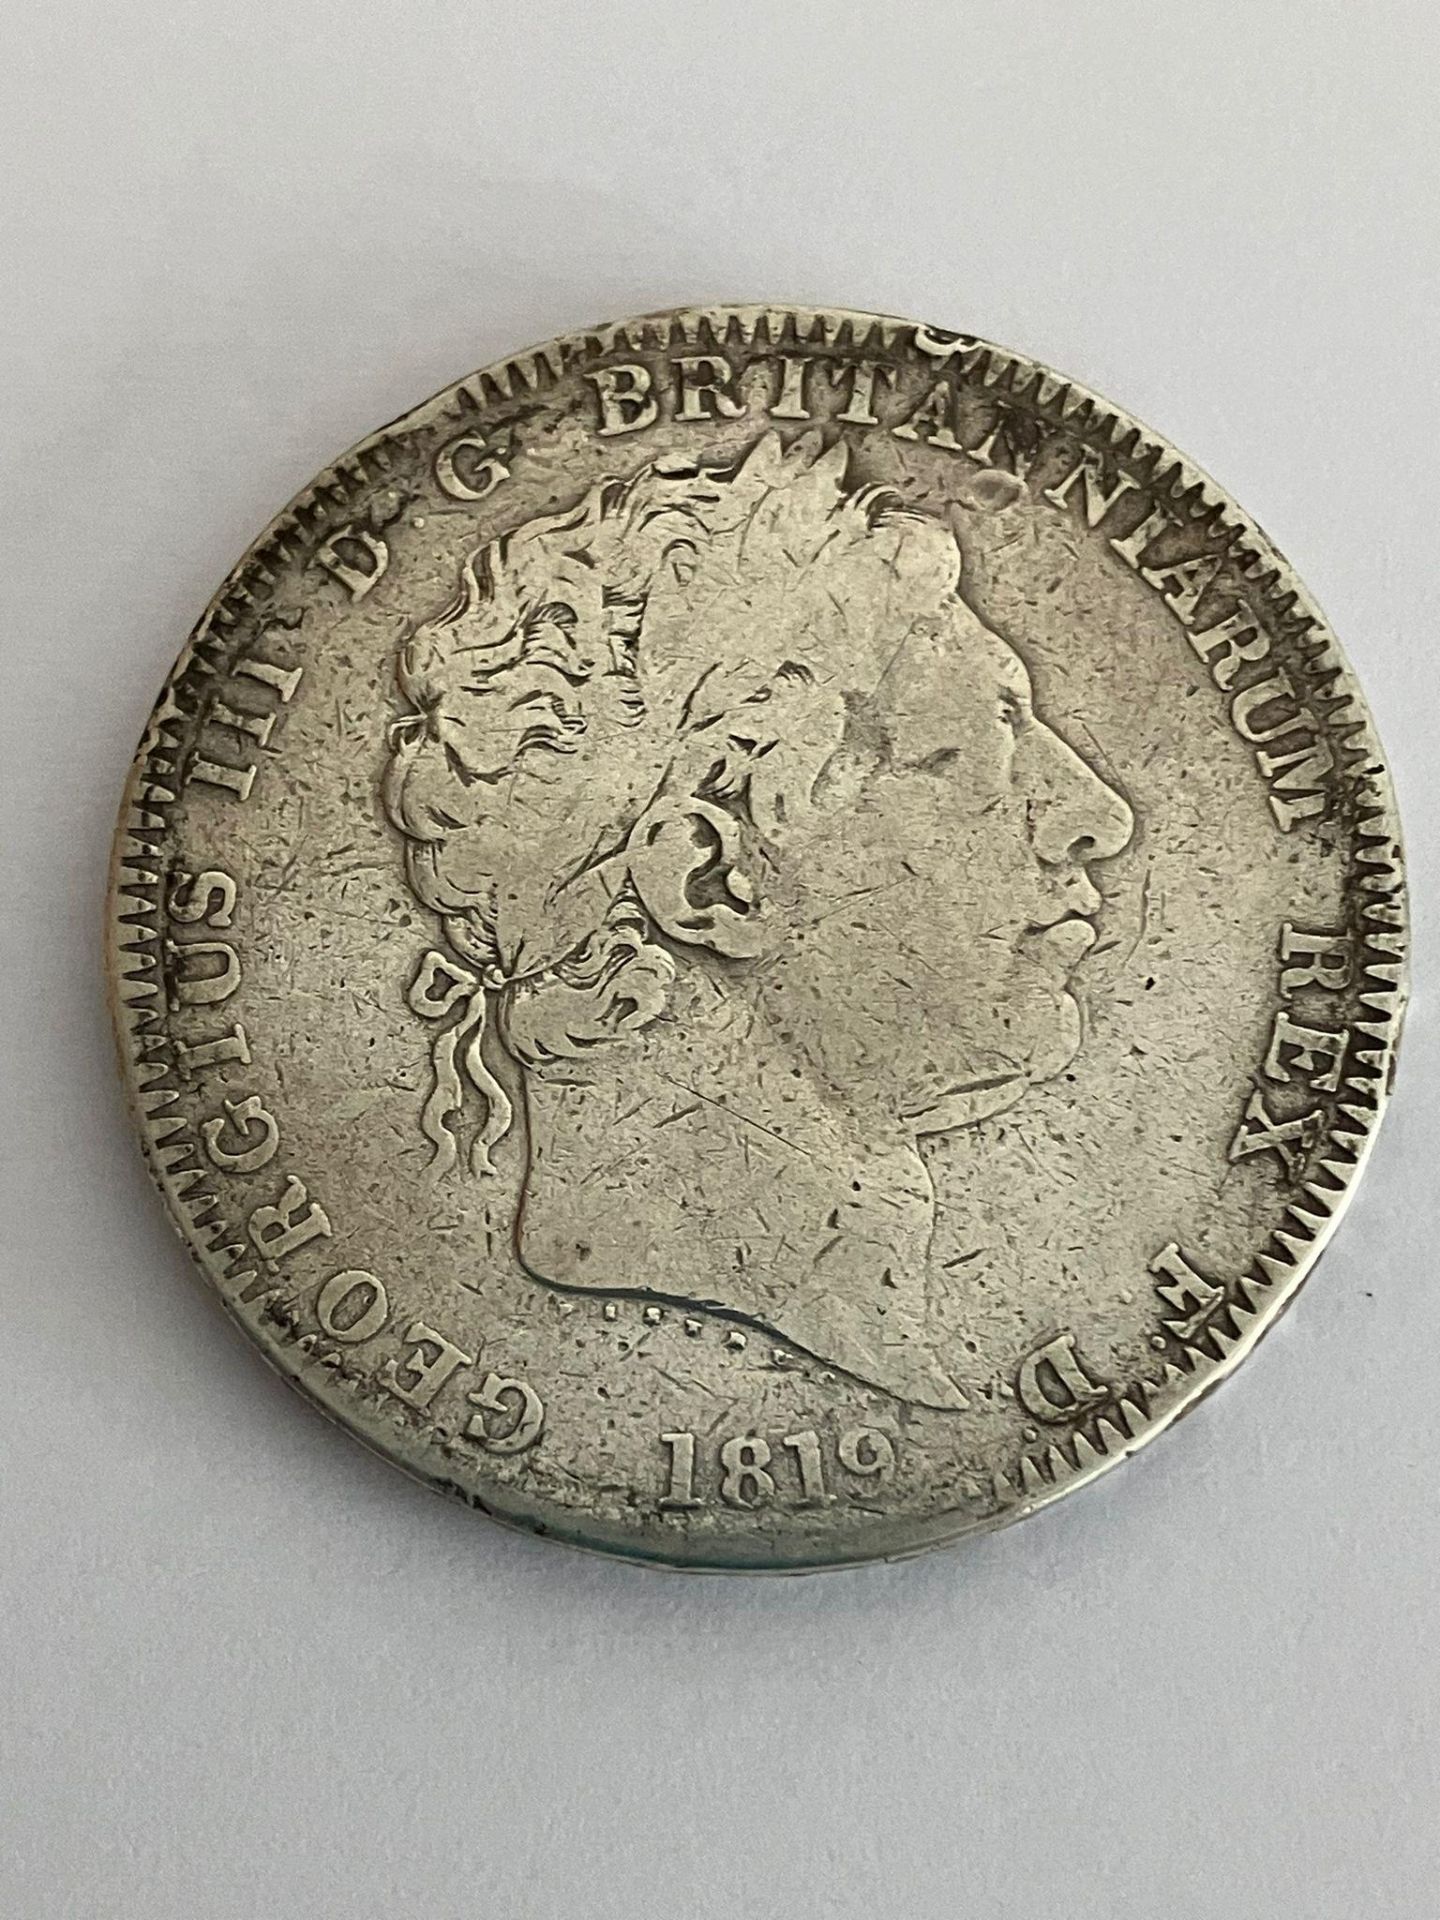 1819 GEORGE III SILVER CROWN. Fair condition. Please see pictures.